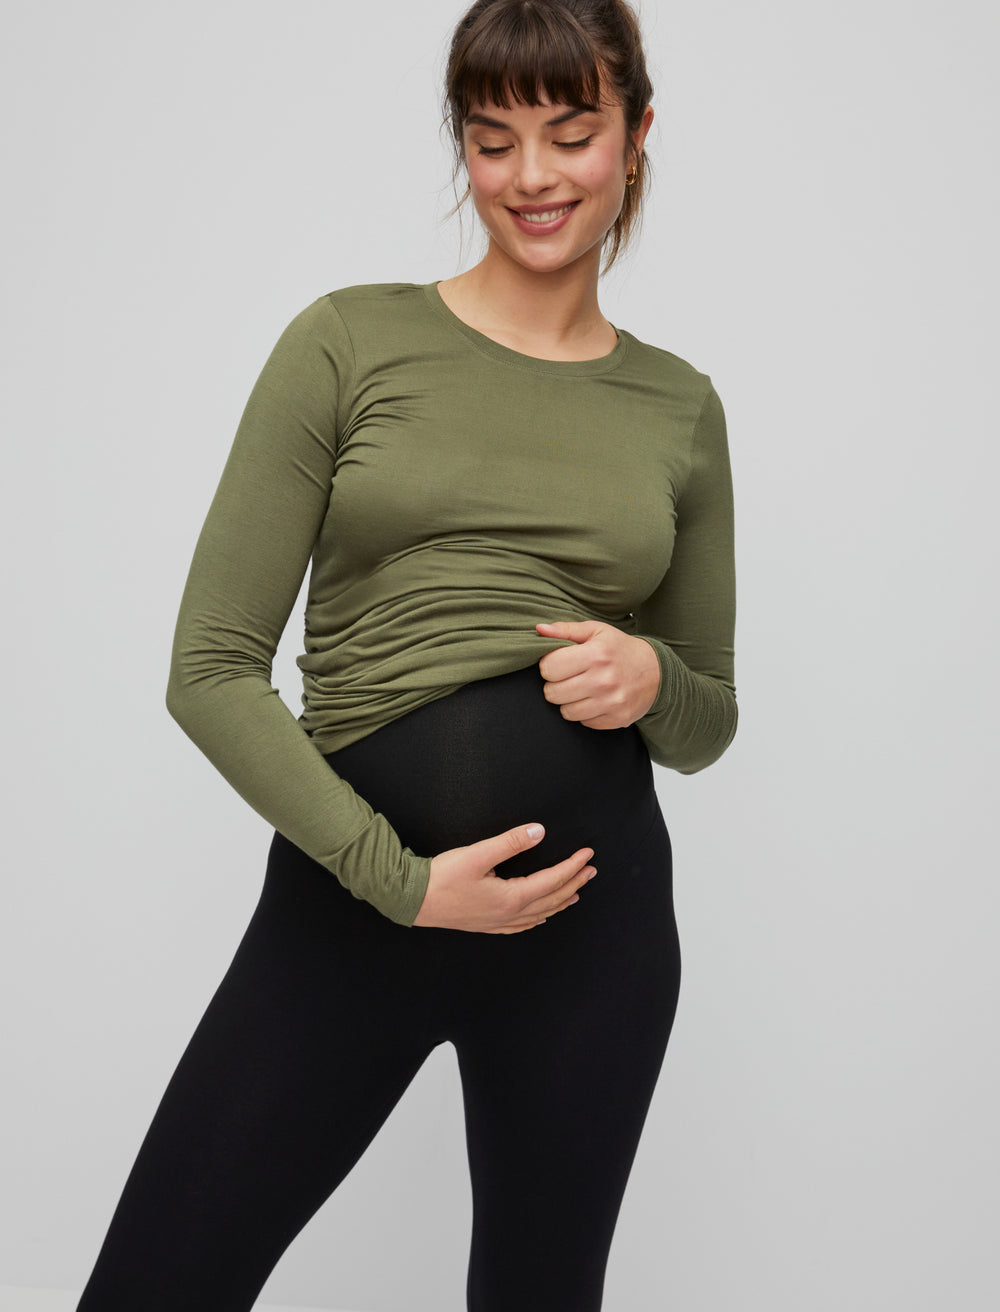 Babysprouts Basic Leggings in Rosewood